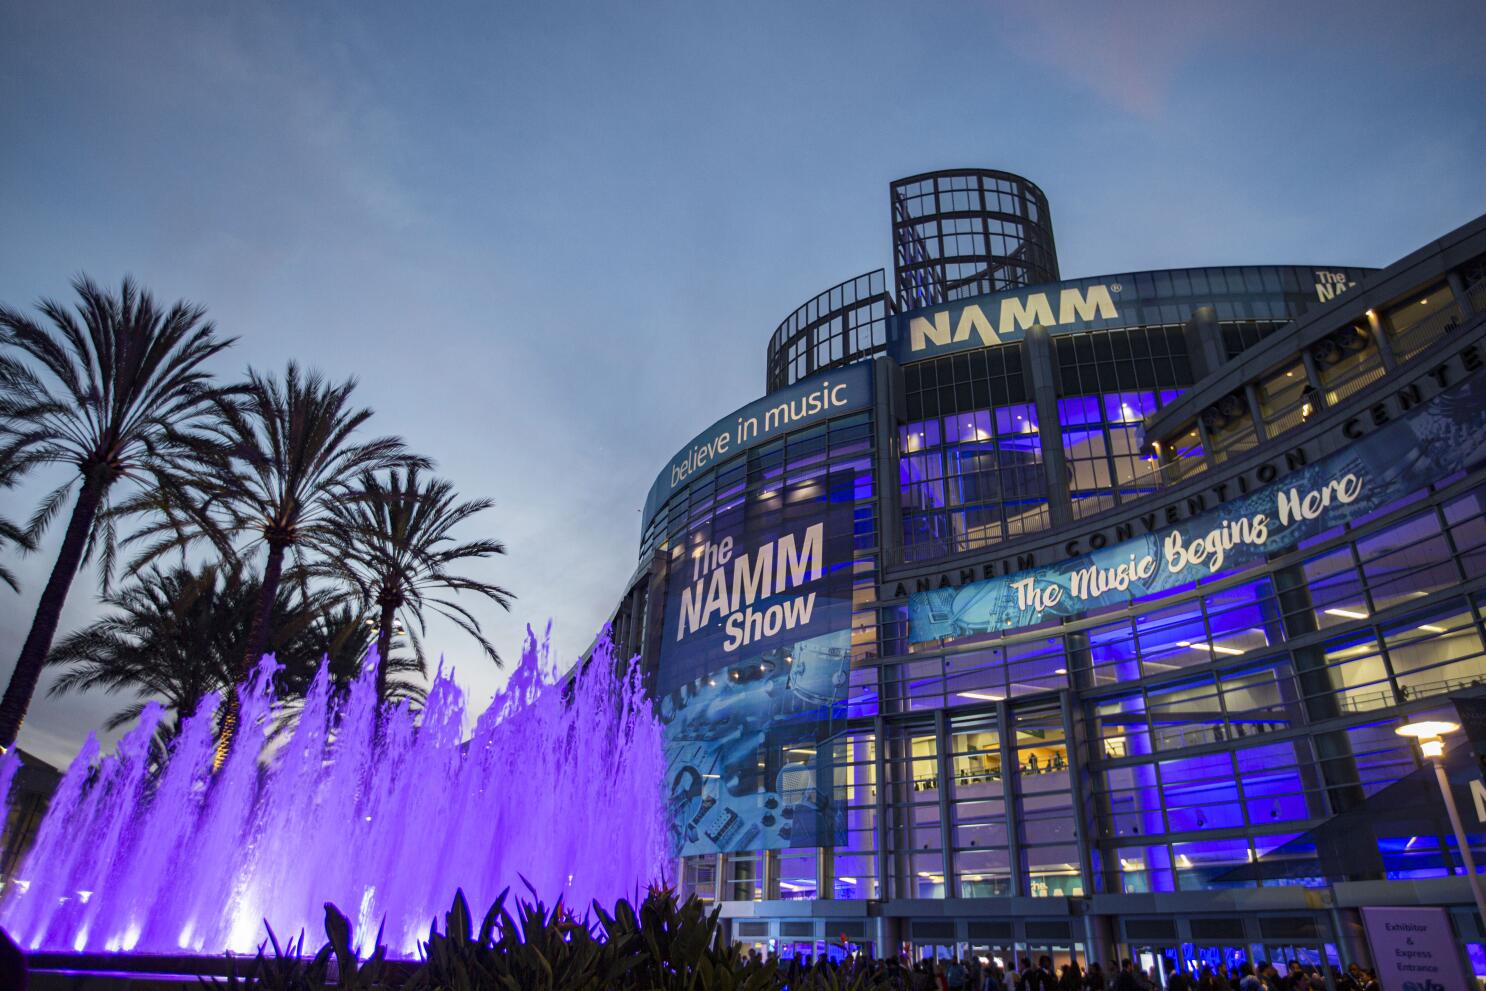 15 Facts About Music History In Anaheim, California